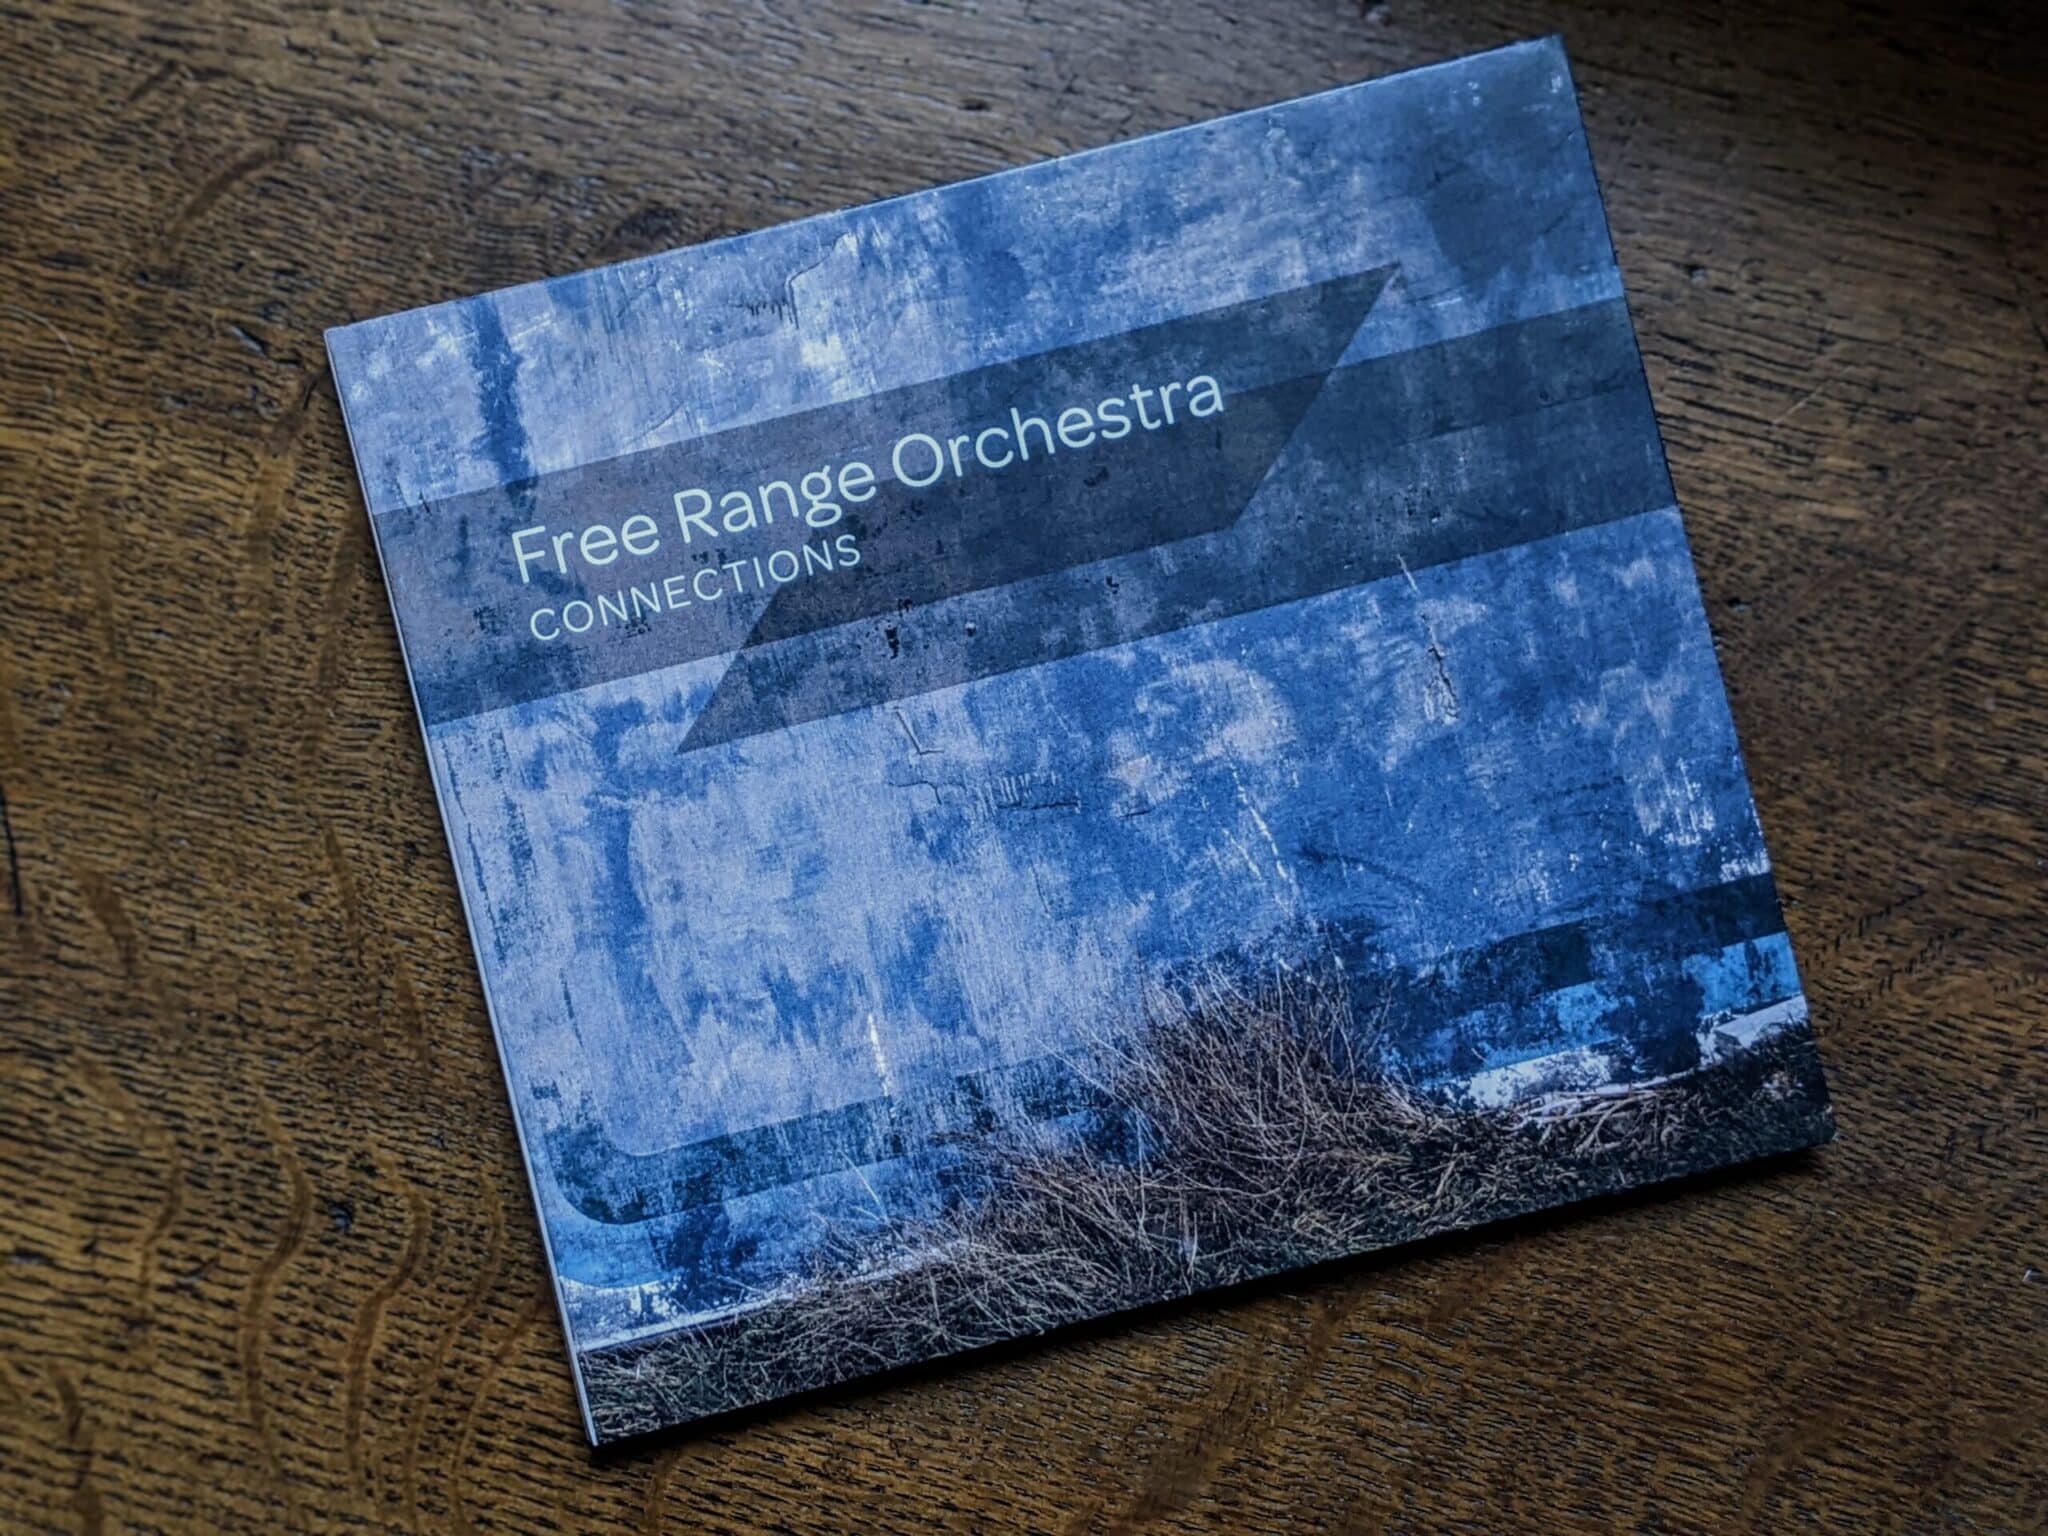 A photography of the CD recording of the Free Rand Orchestra/ Evan Parker recording Connections